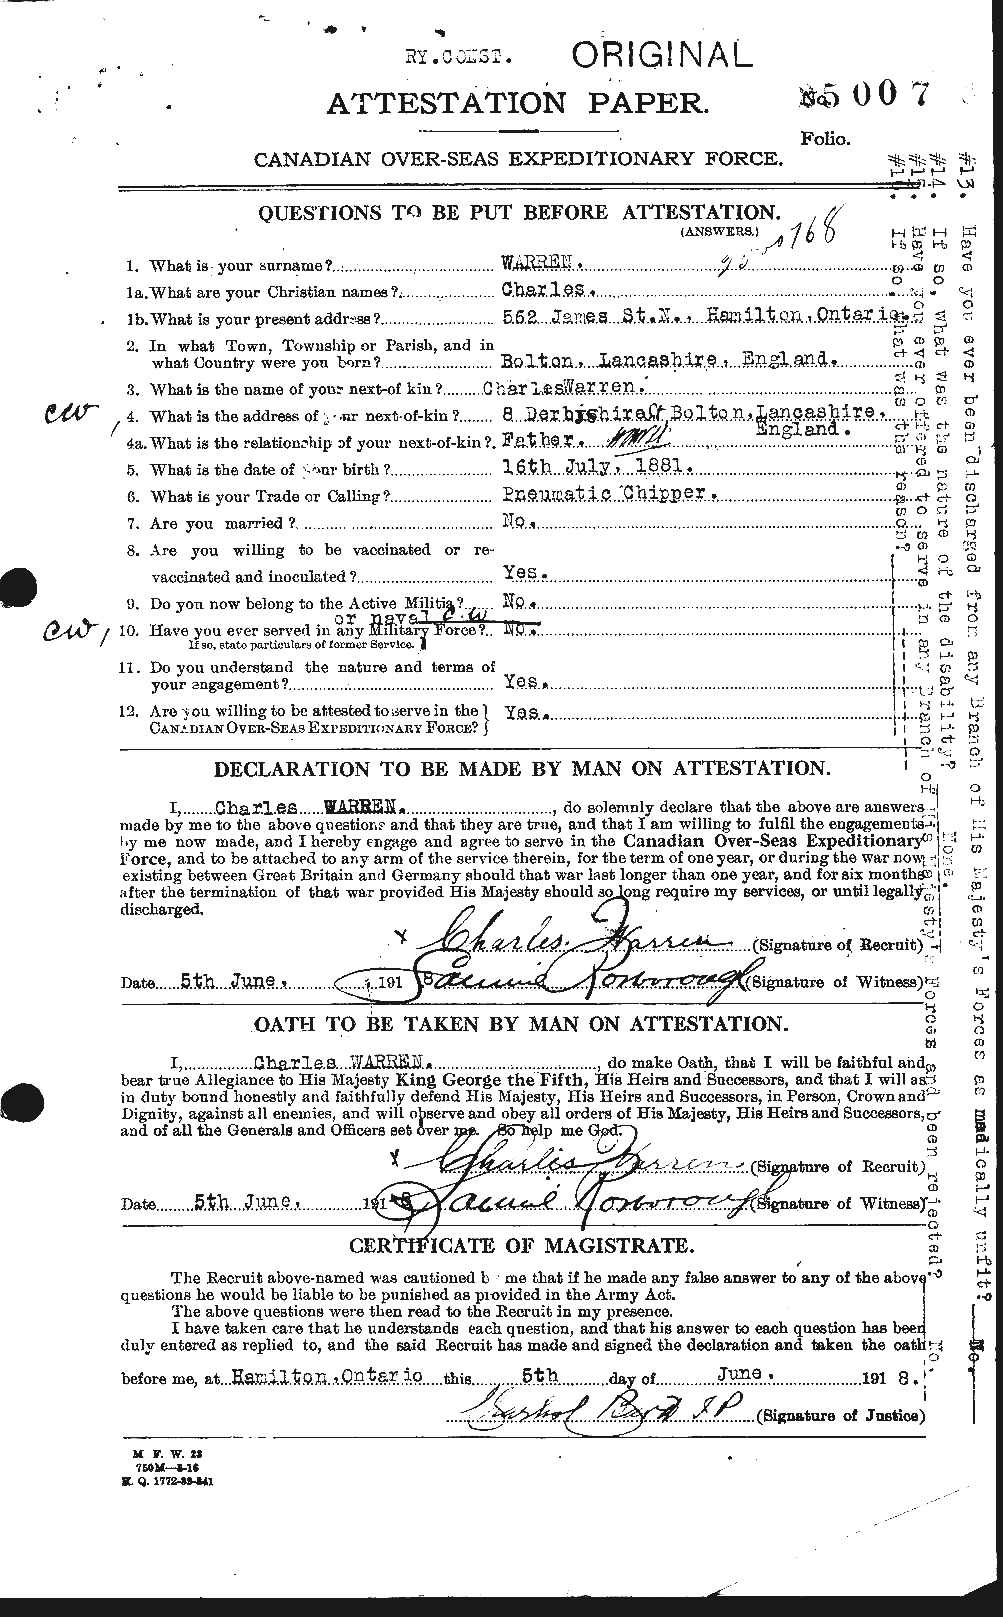 Personnel Records of the First World War - CEF 658386a